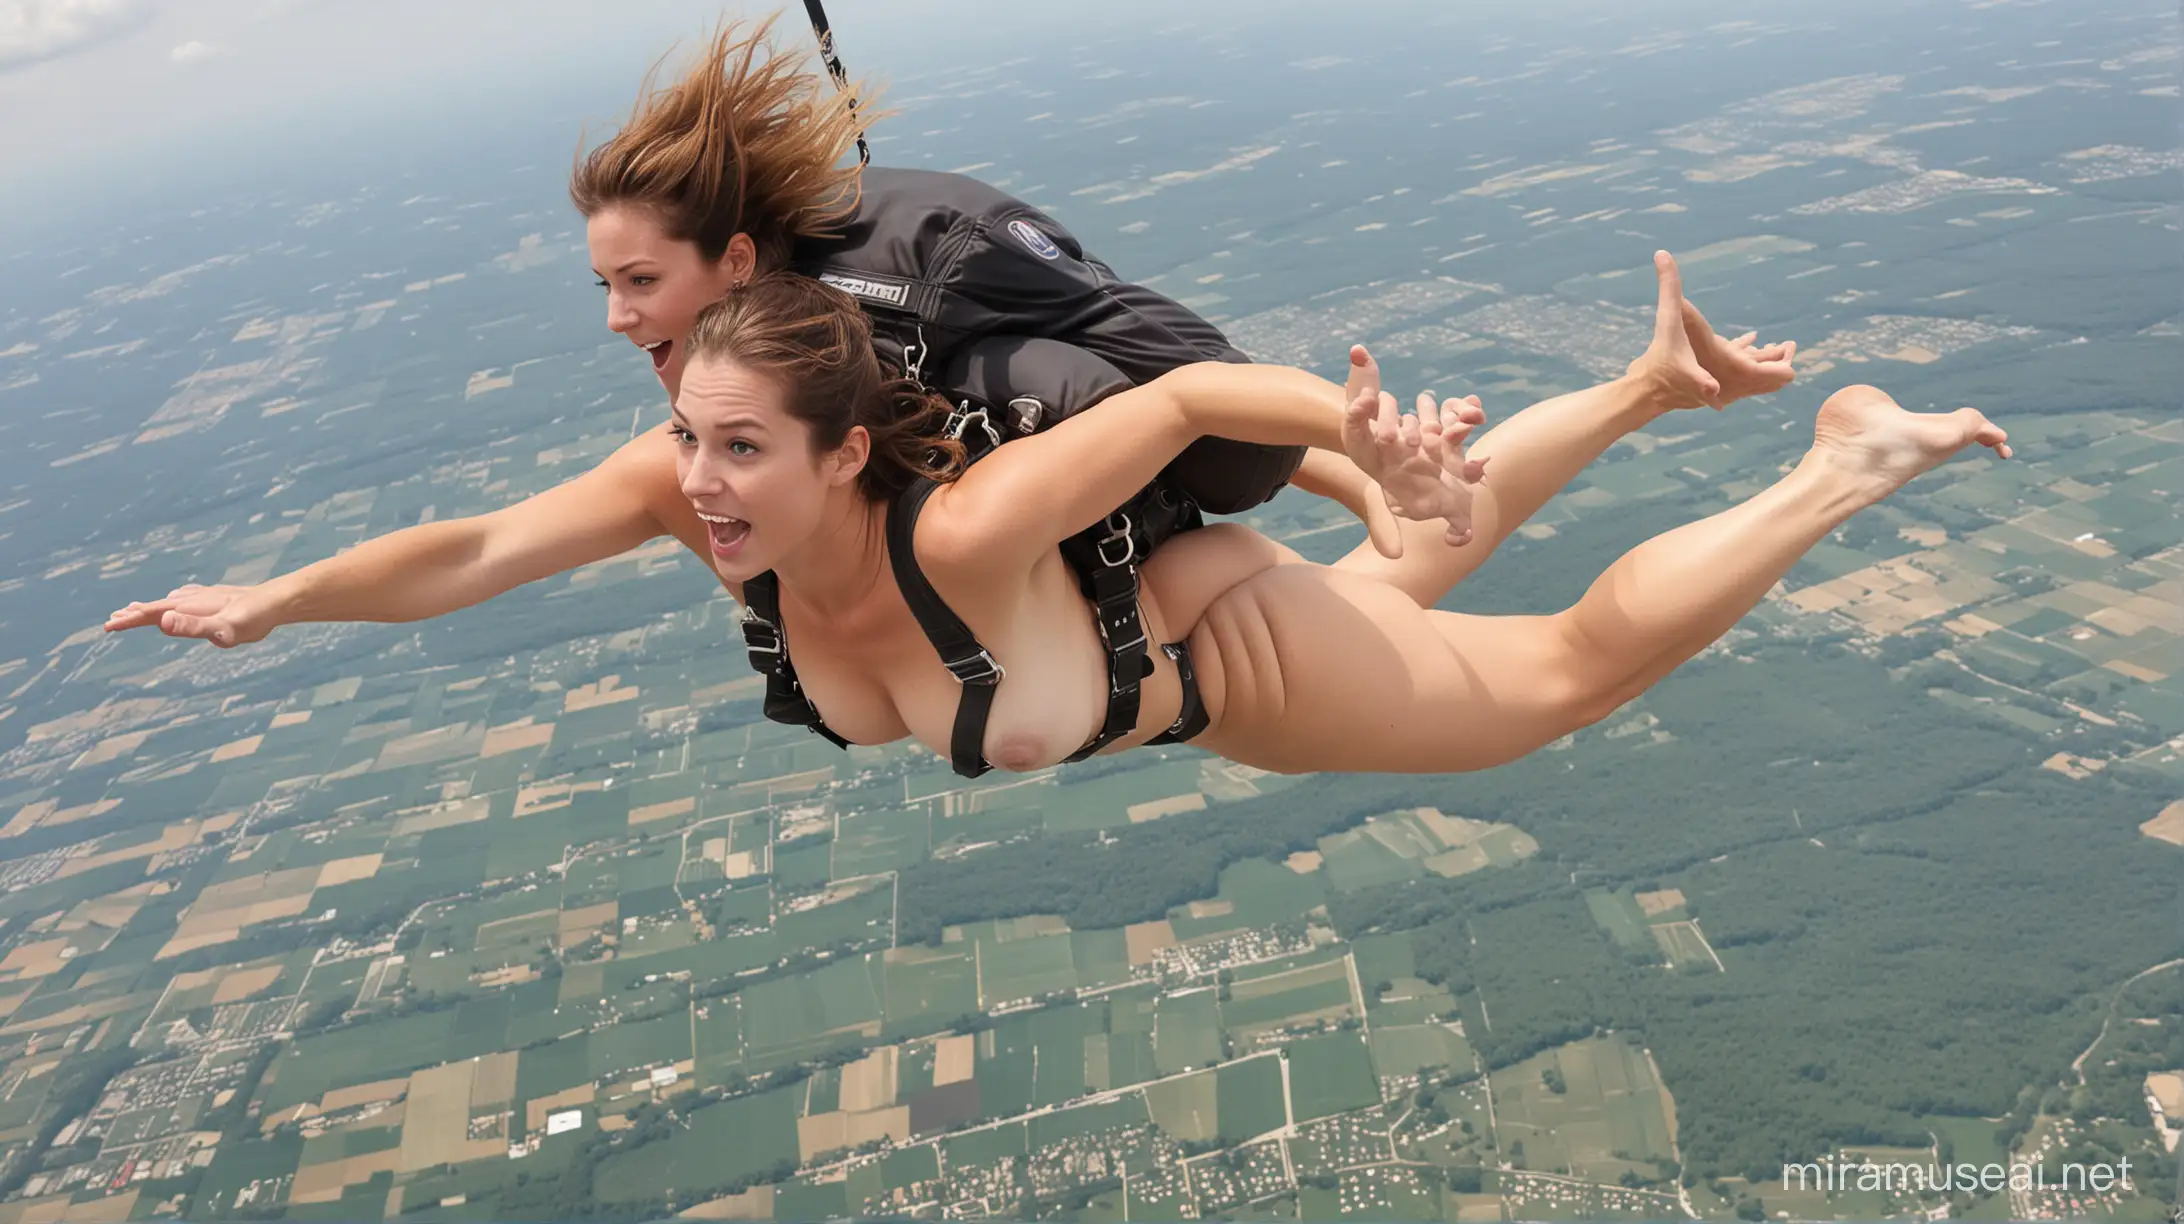 naked woman skydiving 